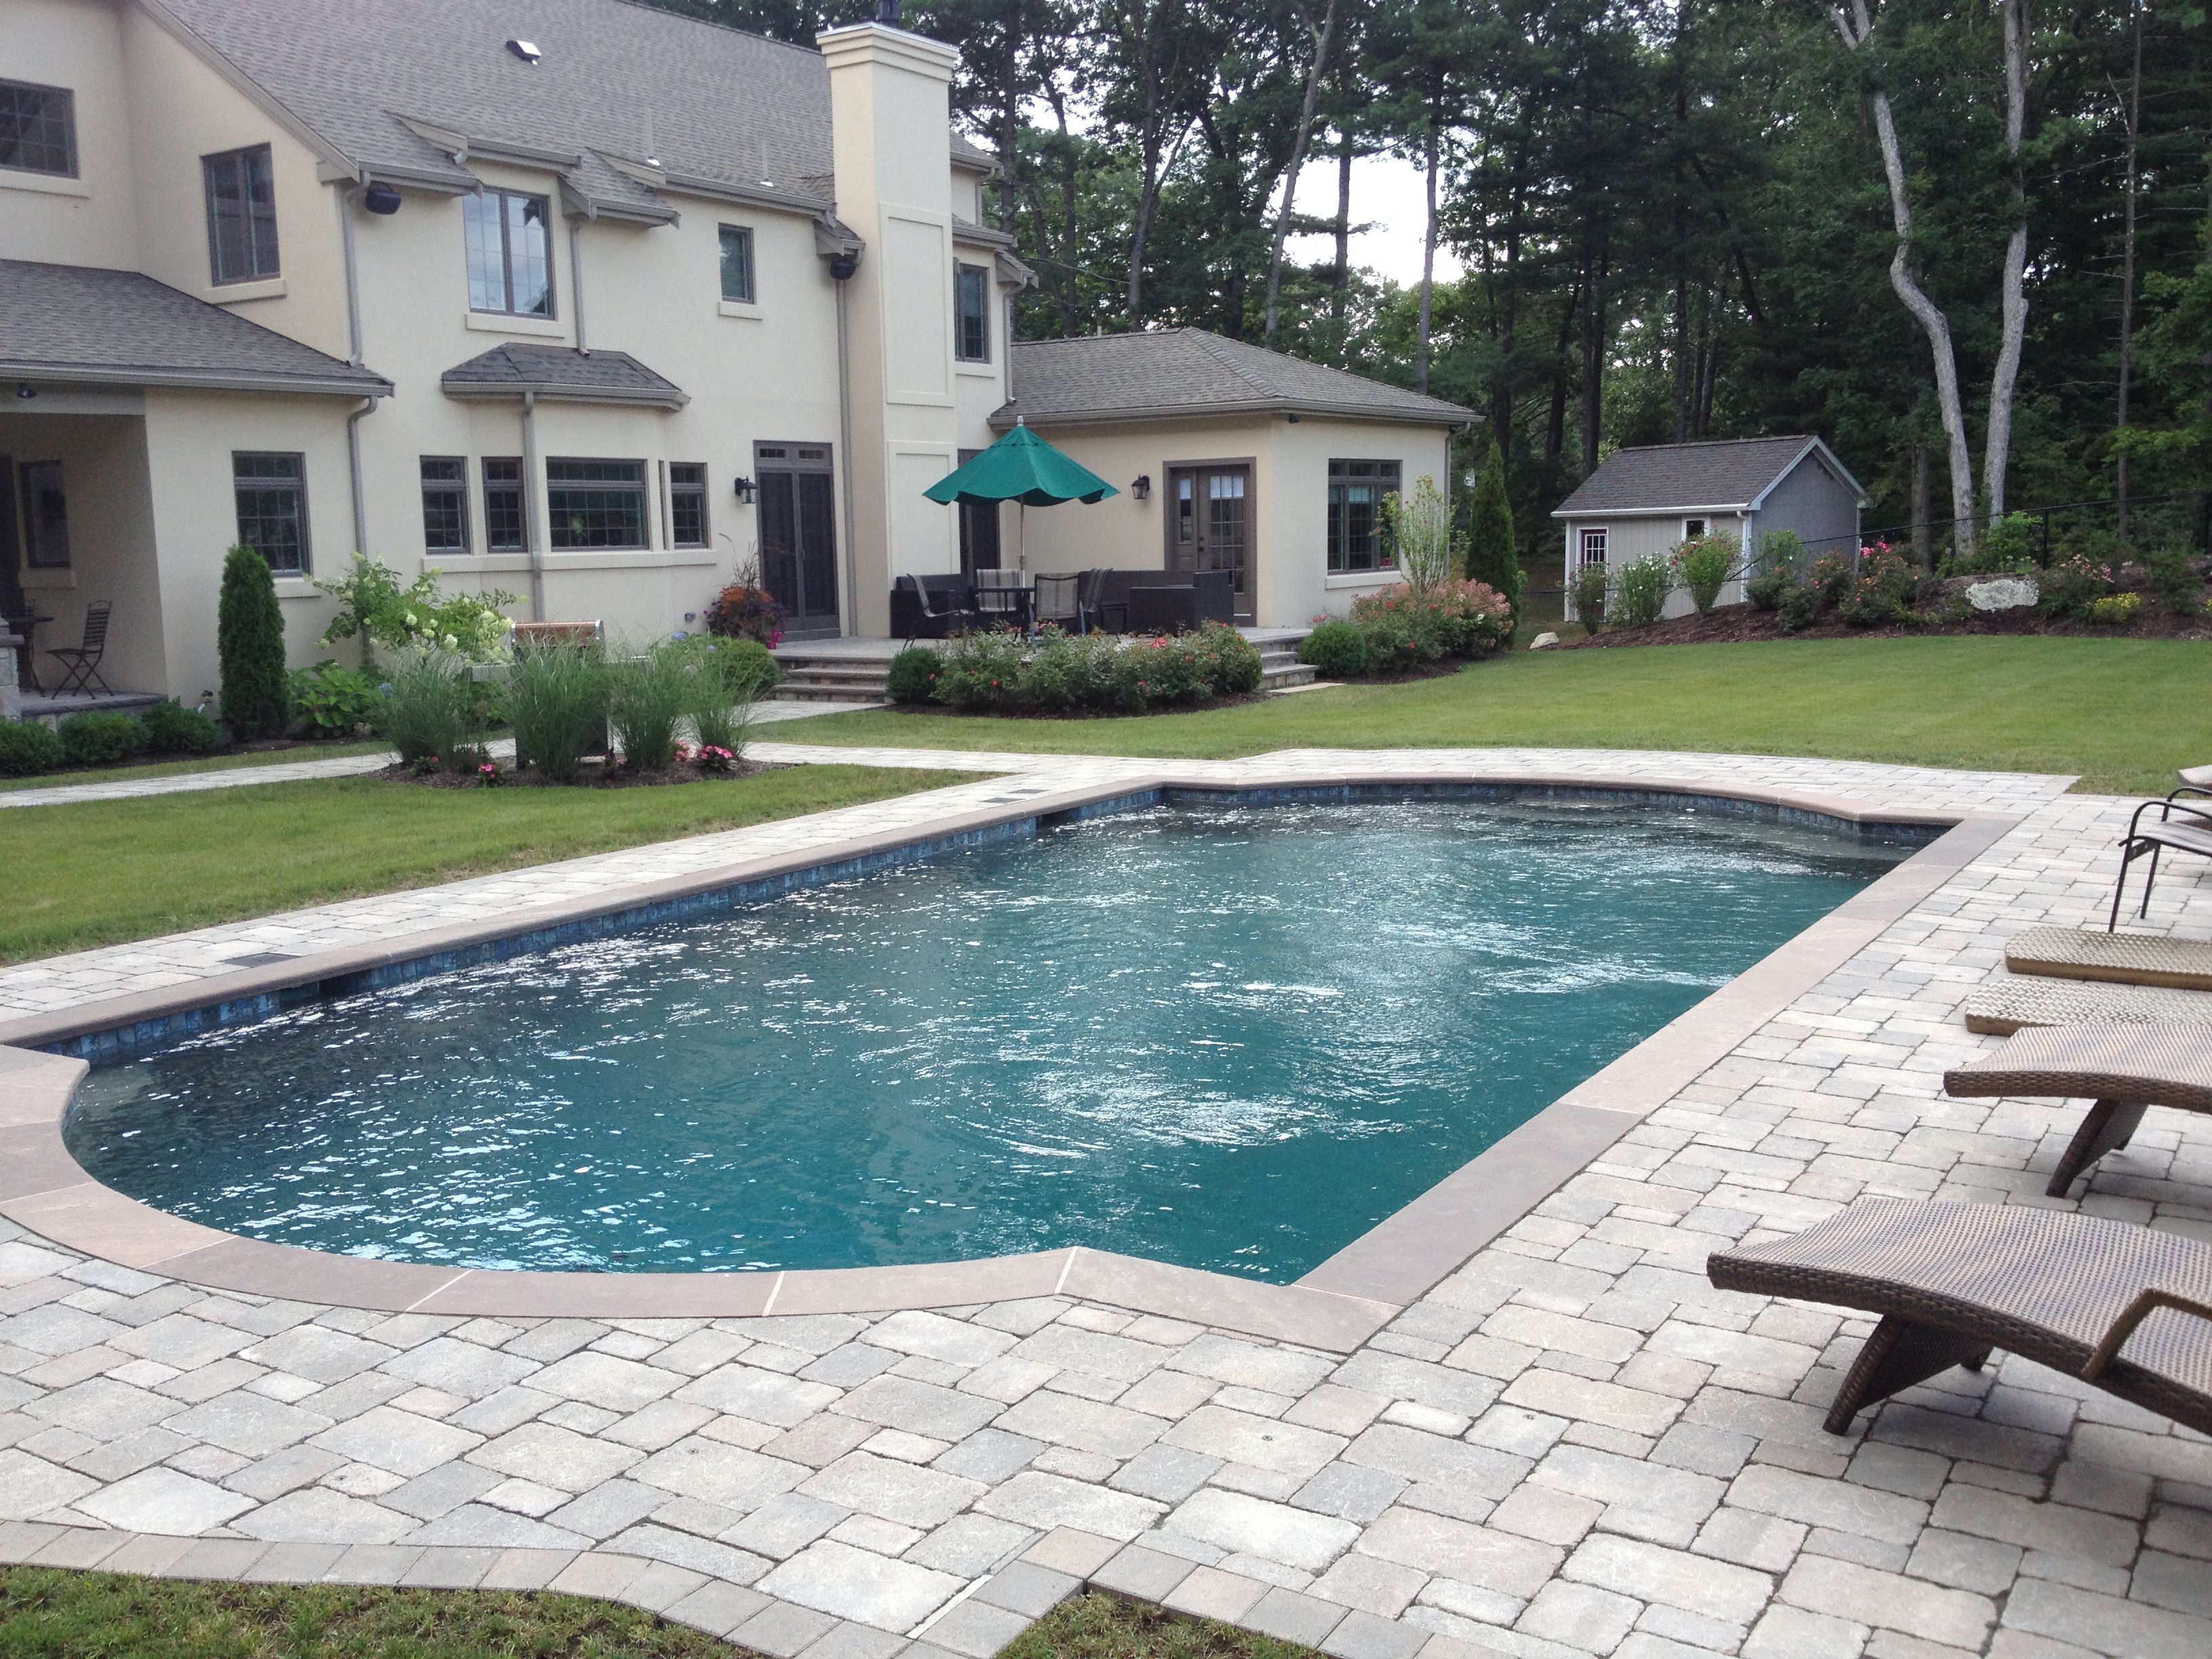 Paving The Pool Area For Entertaining